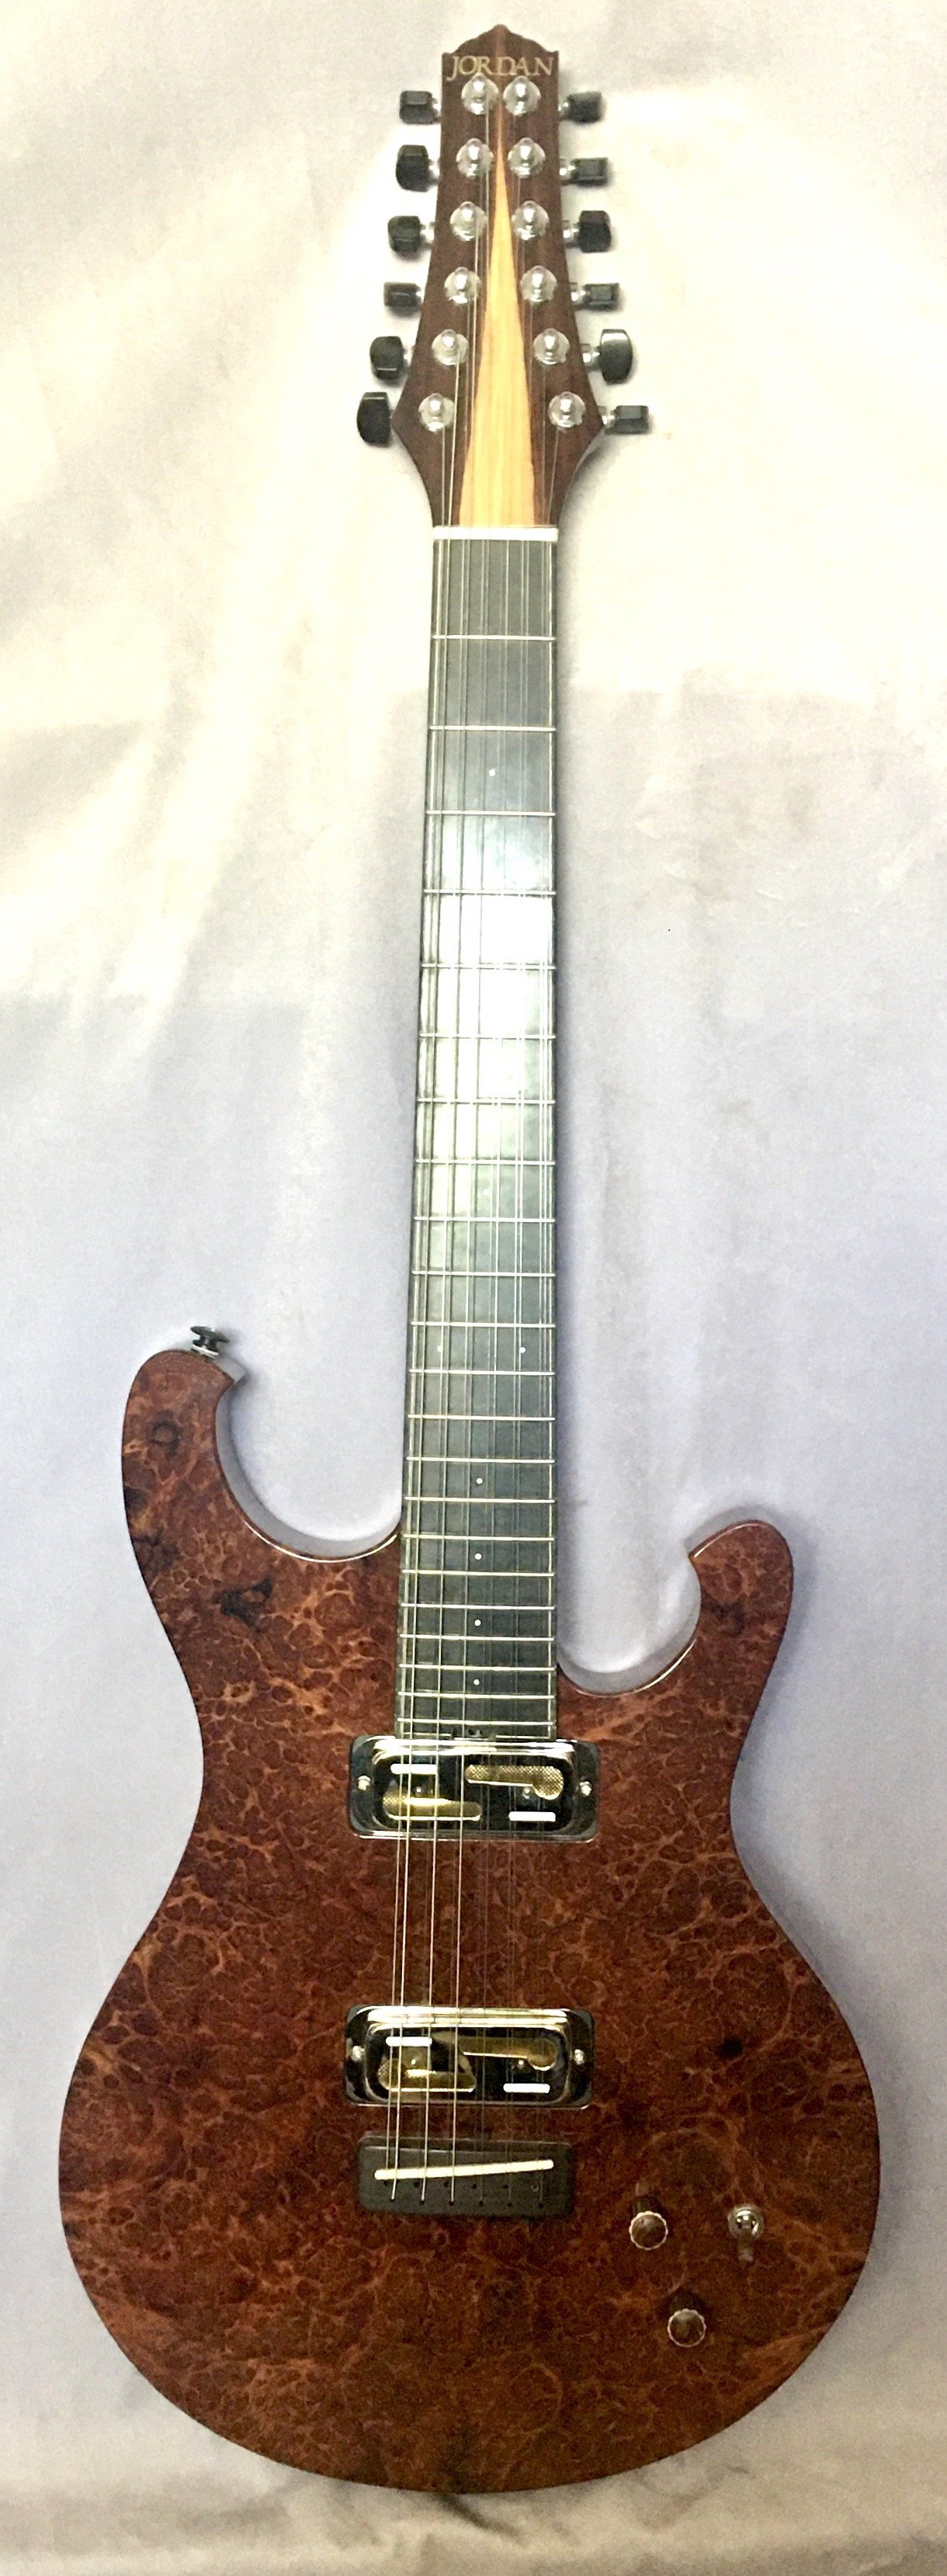 Jeff Wolfish 12 string completed.jpg